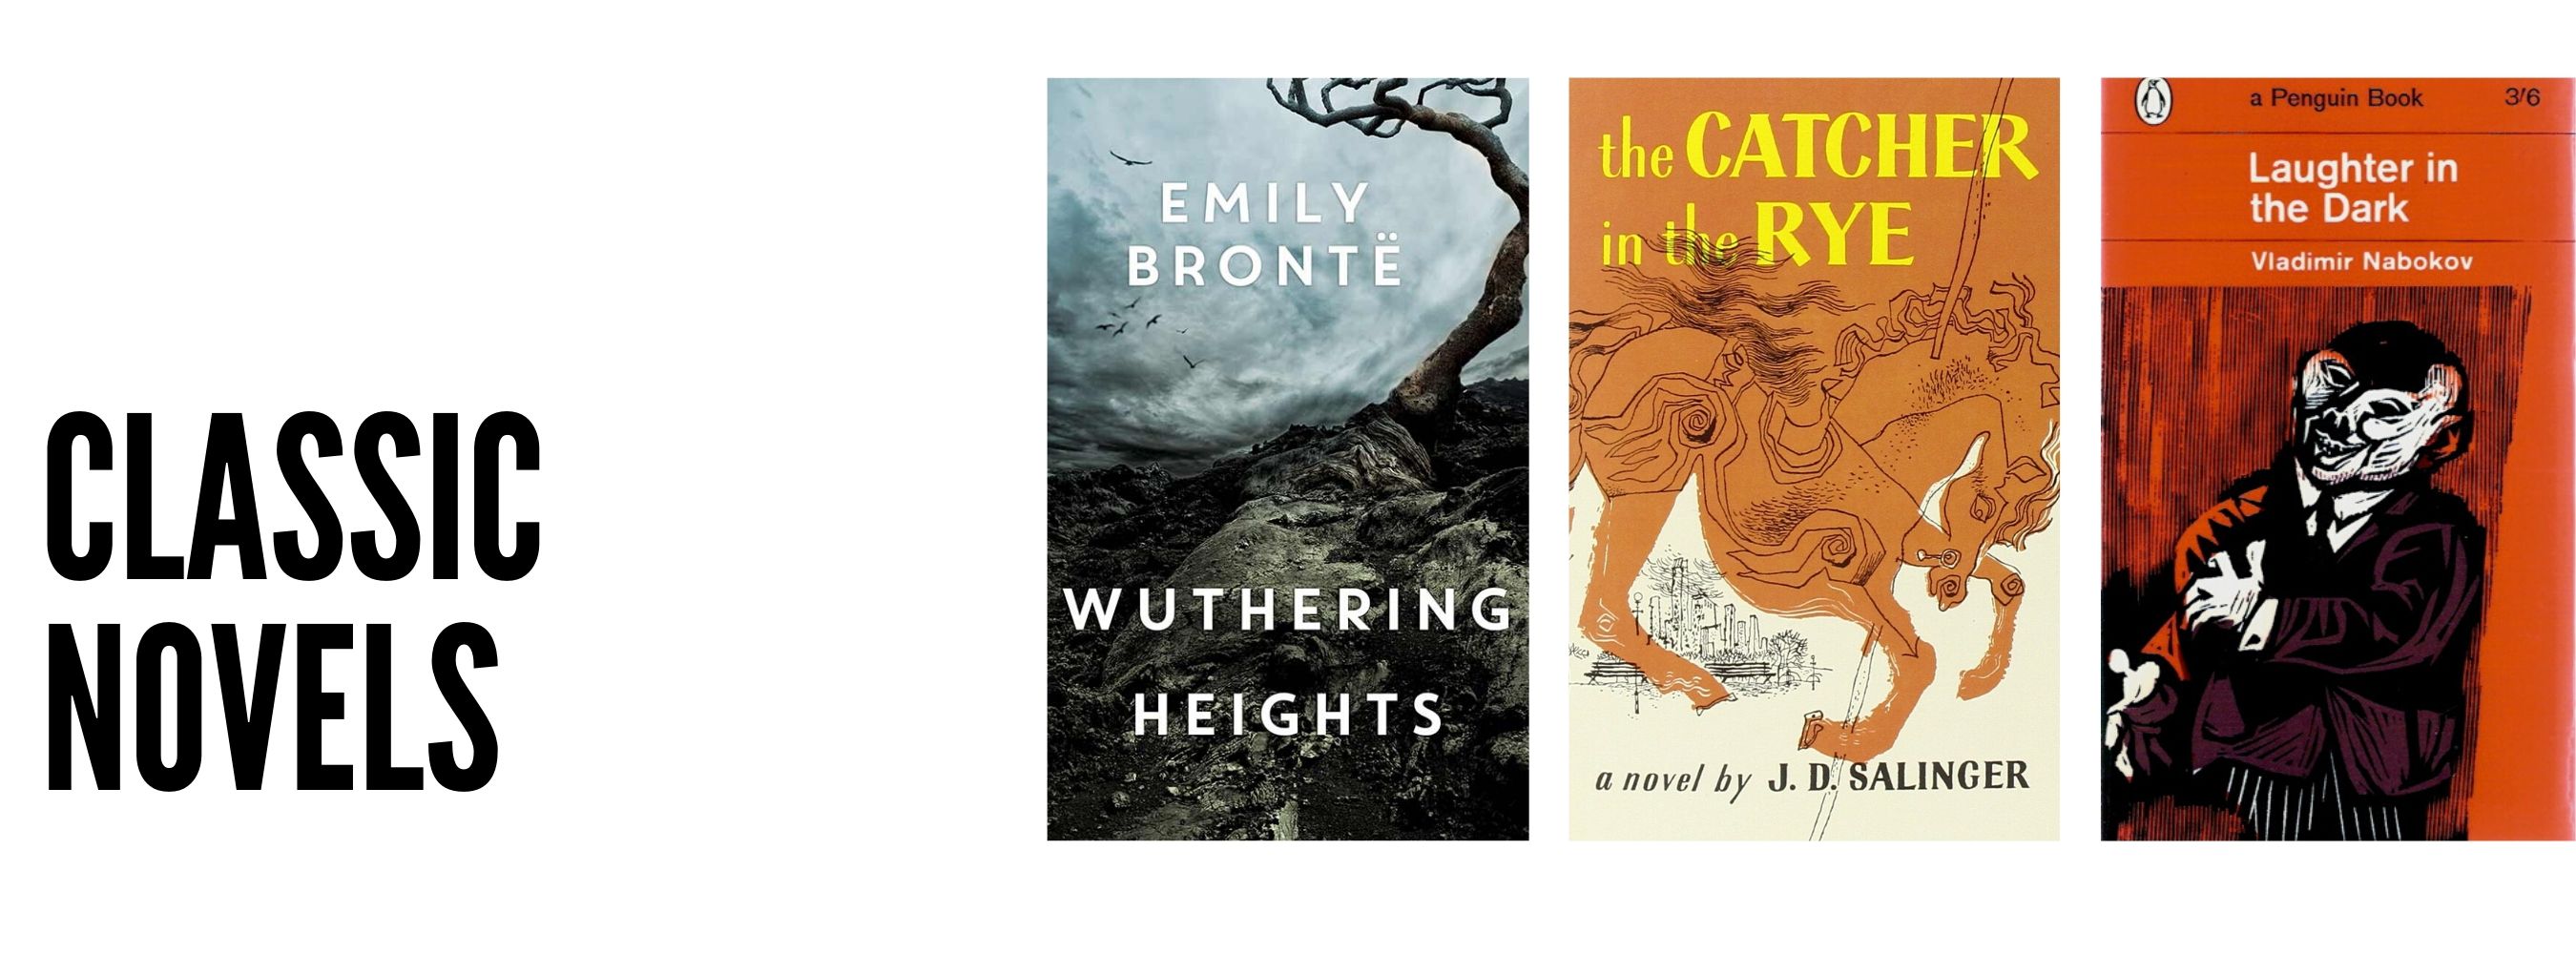 Surly’s Most Popular Books of 2019